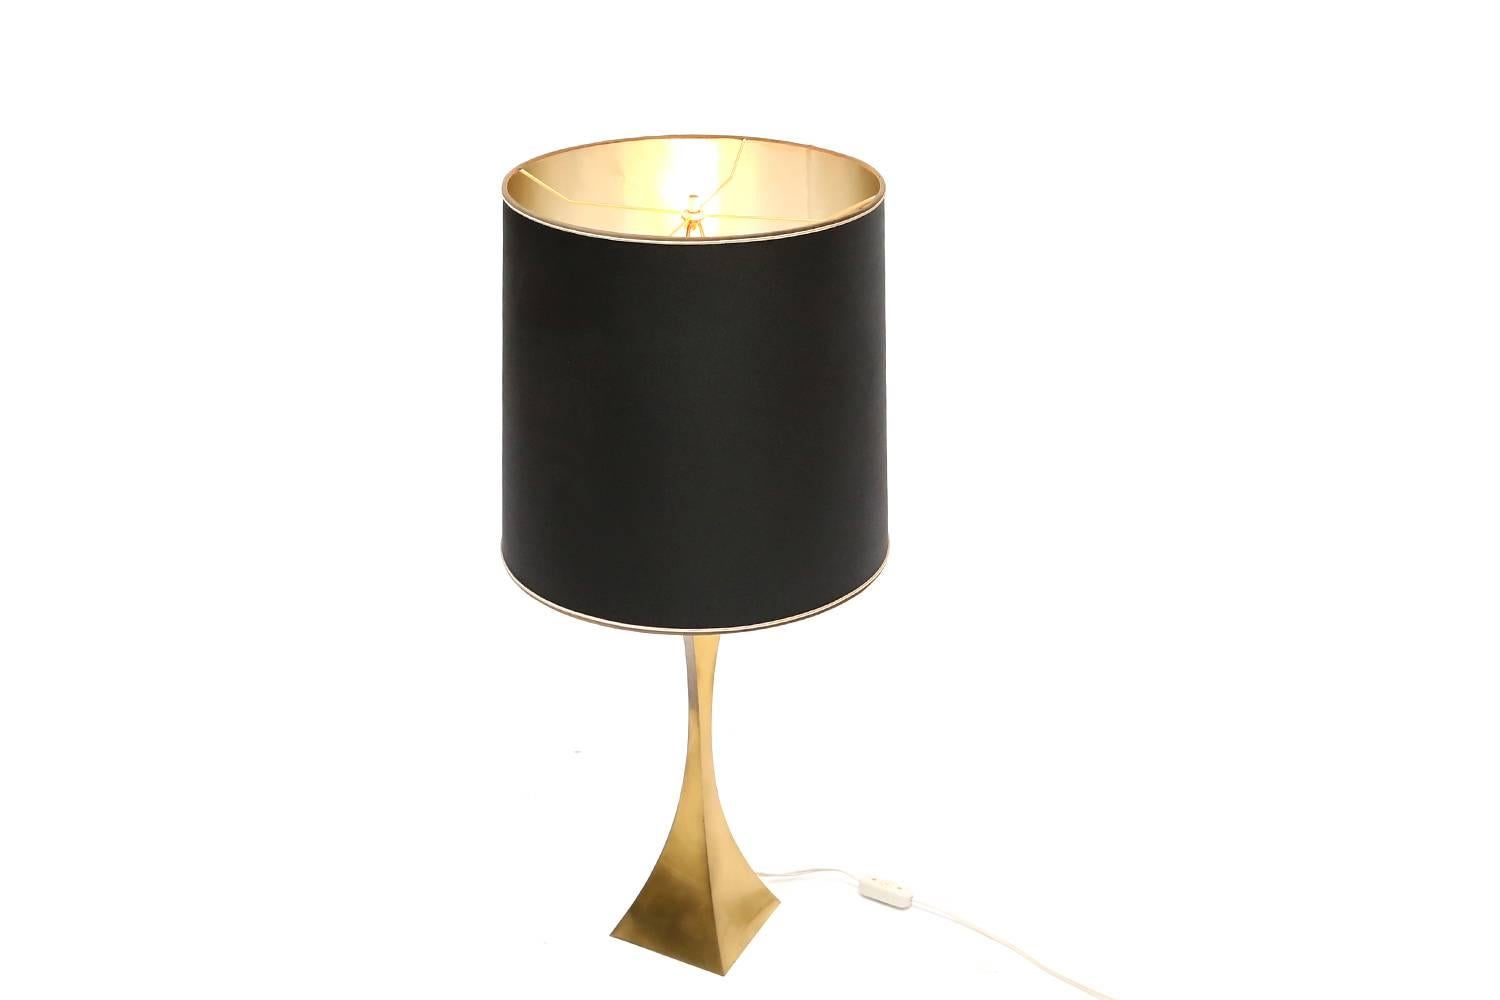 Hollywood Regency brass table lamp by Romeo Rega, Italy, 1970s.
Measures: H 80 cm Ø 40 cm.
Design wise there is a very interesting twist or bend in the brass base of the lamp.
Would fit well in an eclectic glam interior inspired by the likes of